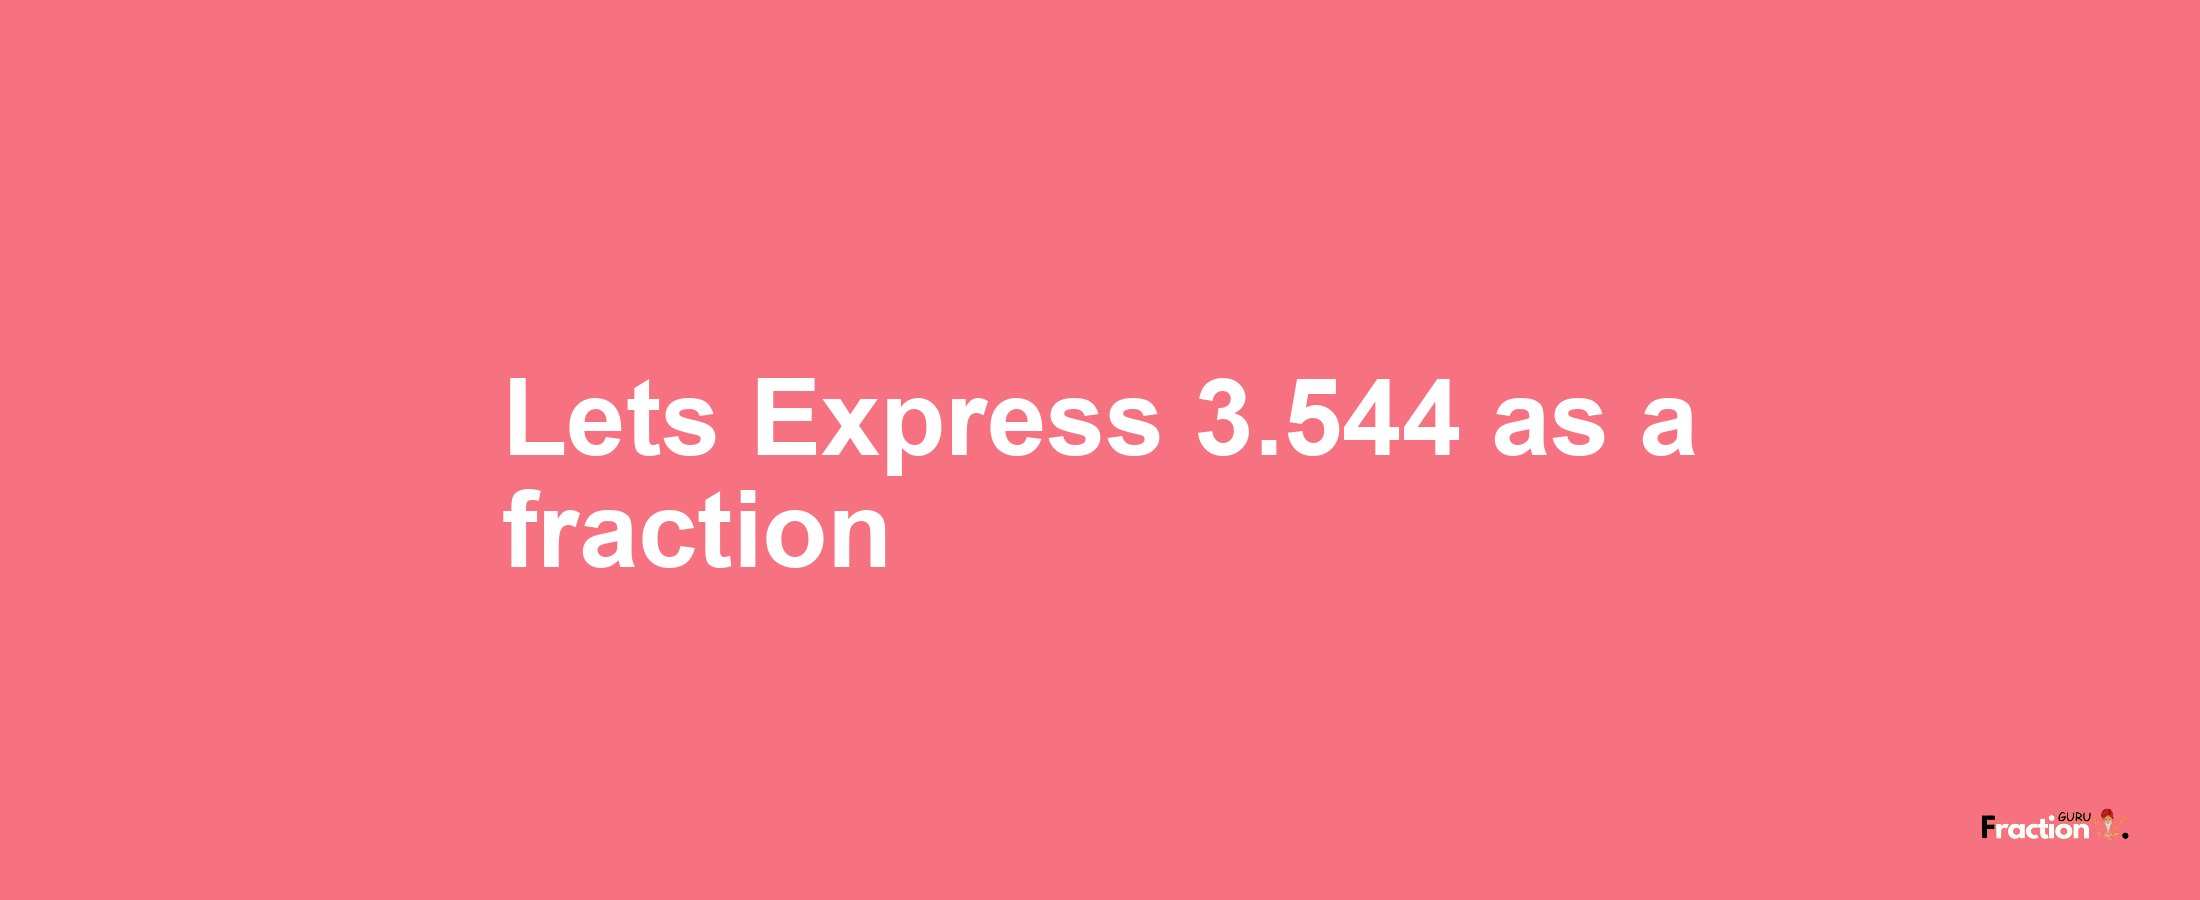 Lets Express 3.544 as afraction